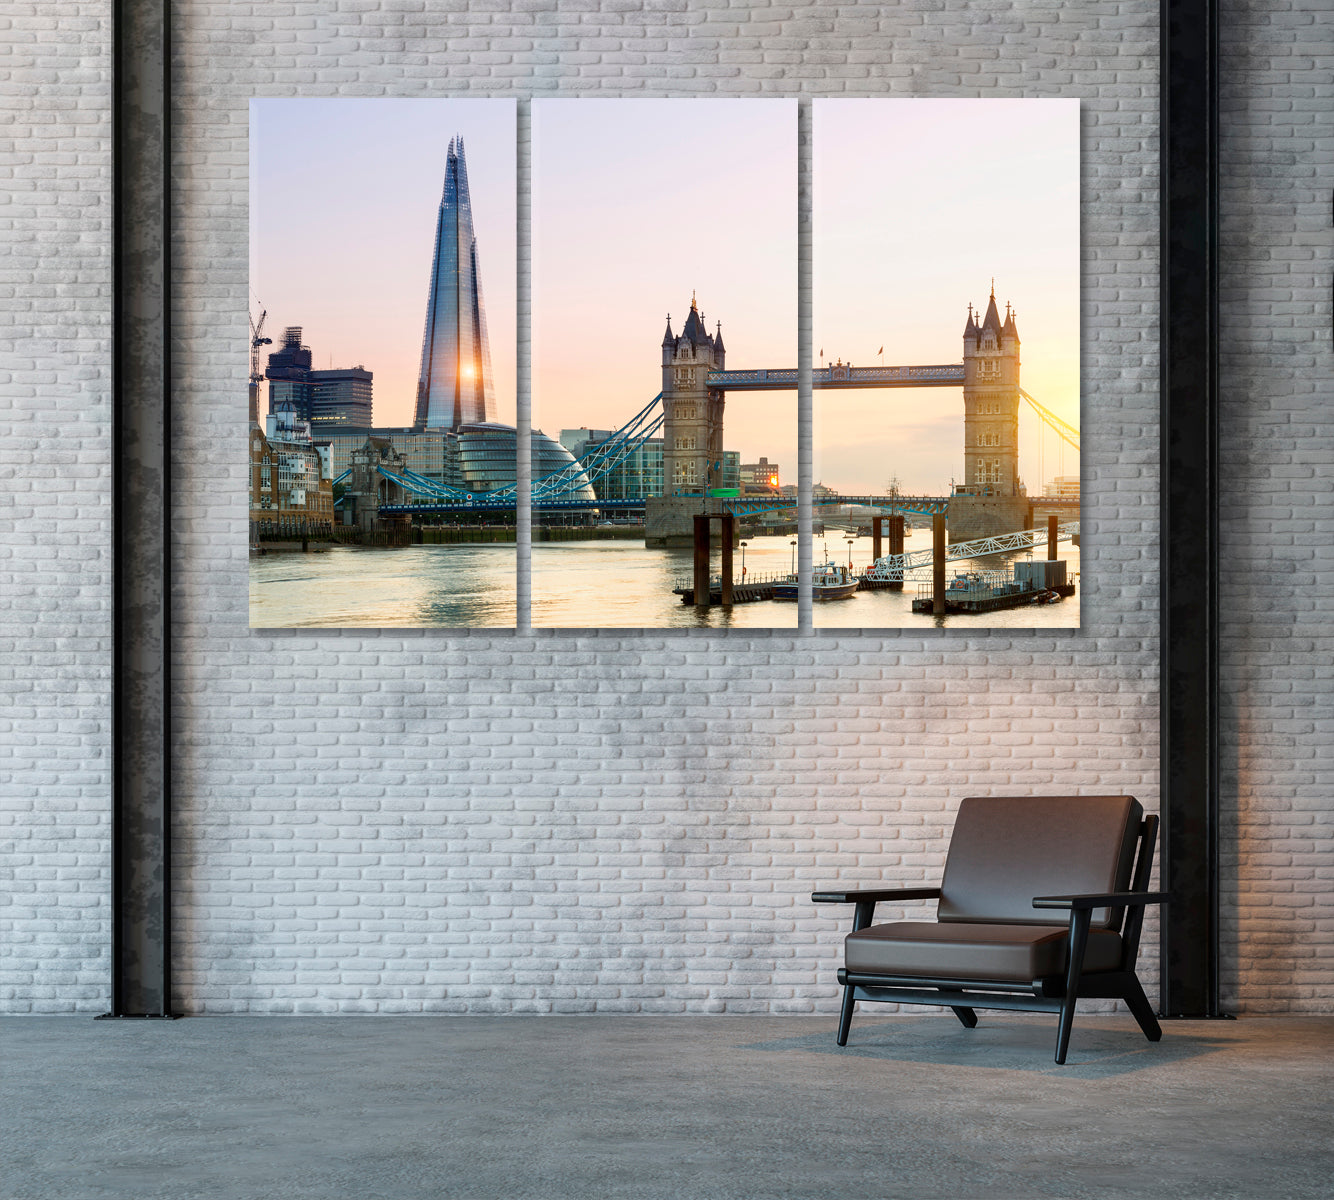 Shard and Tower Bridge London Canvas Print ArtLexy 3 Panels 36"x24" inches 